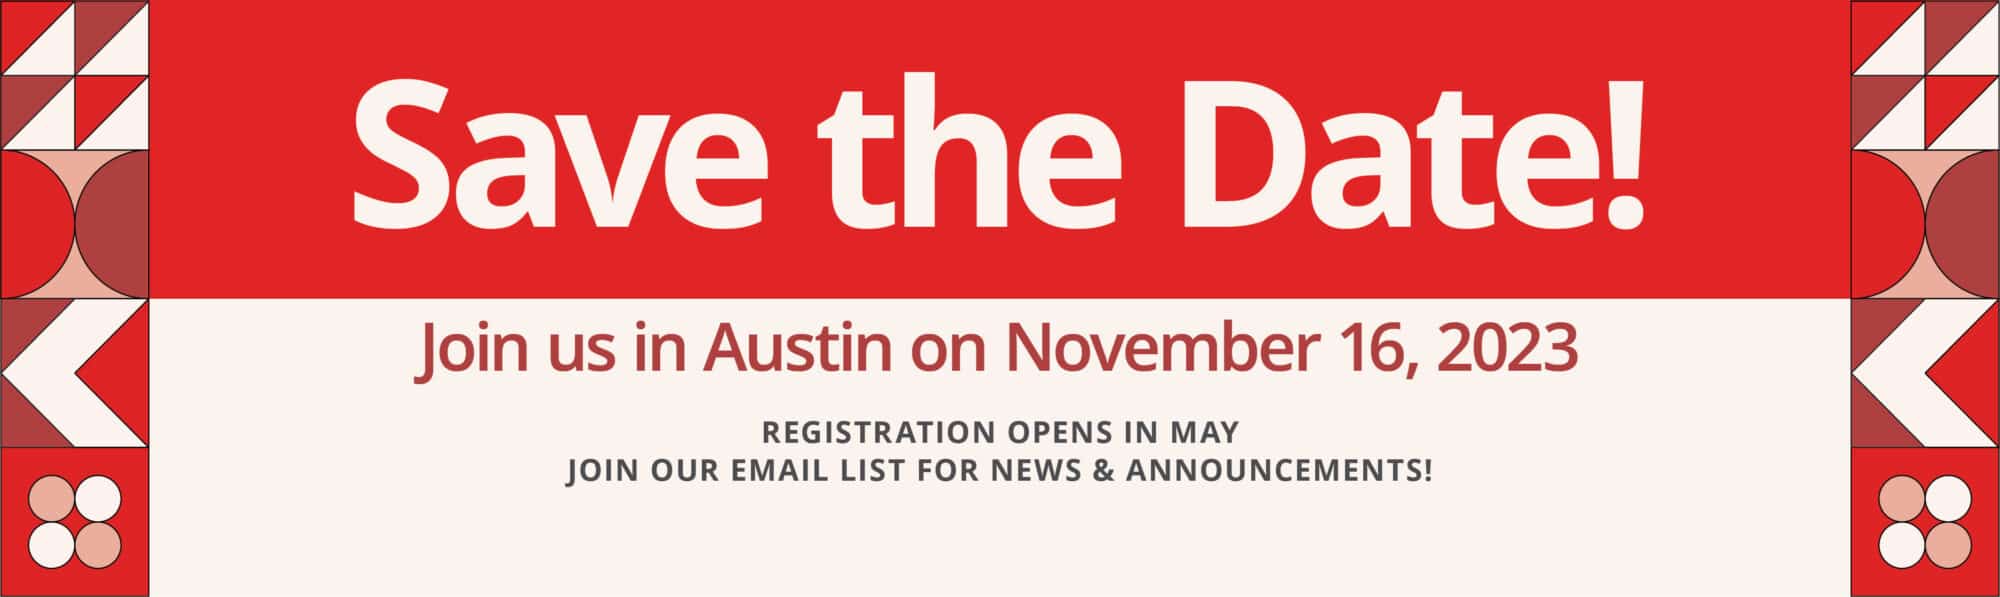 Save the date - join us in Austin on November 16, 2023!